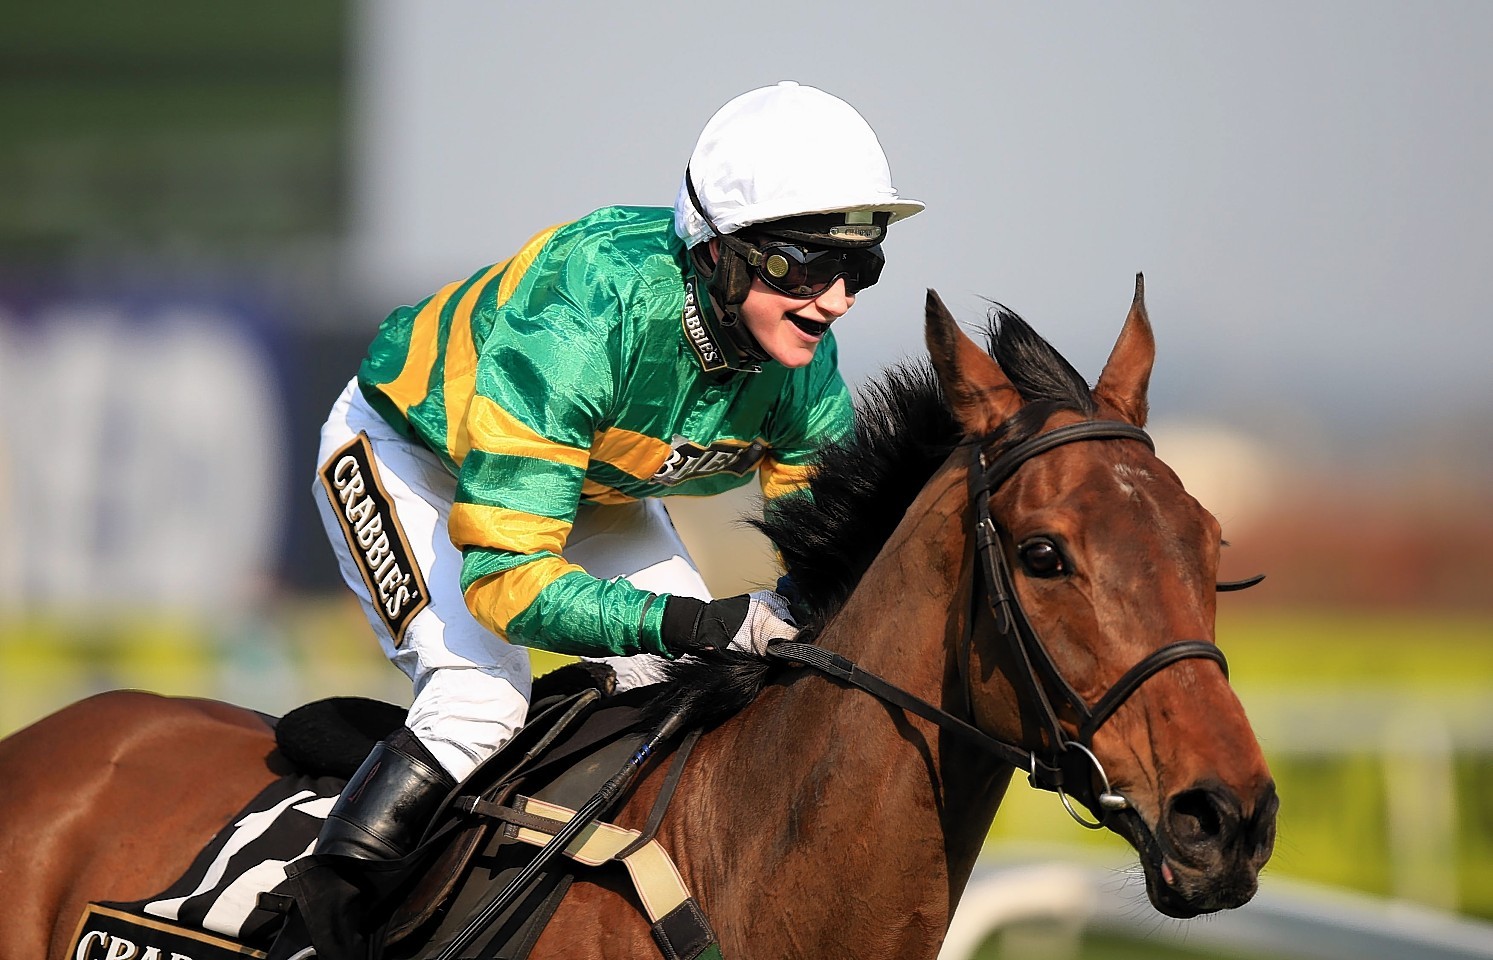 Nina Carberry could become the first female jockey to win the Grand National